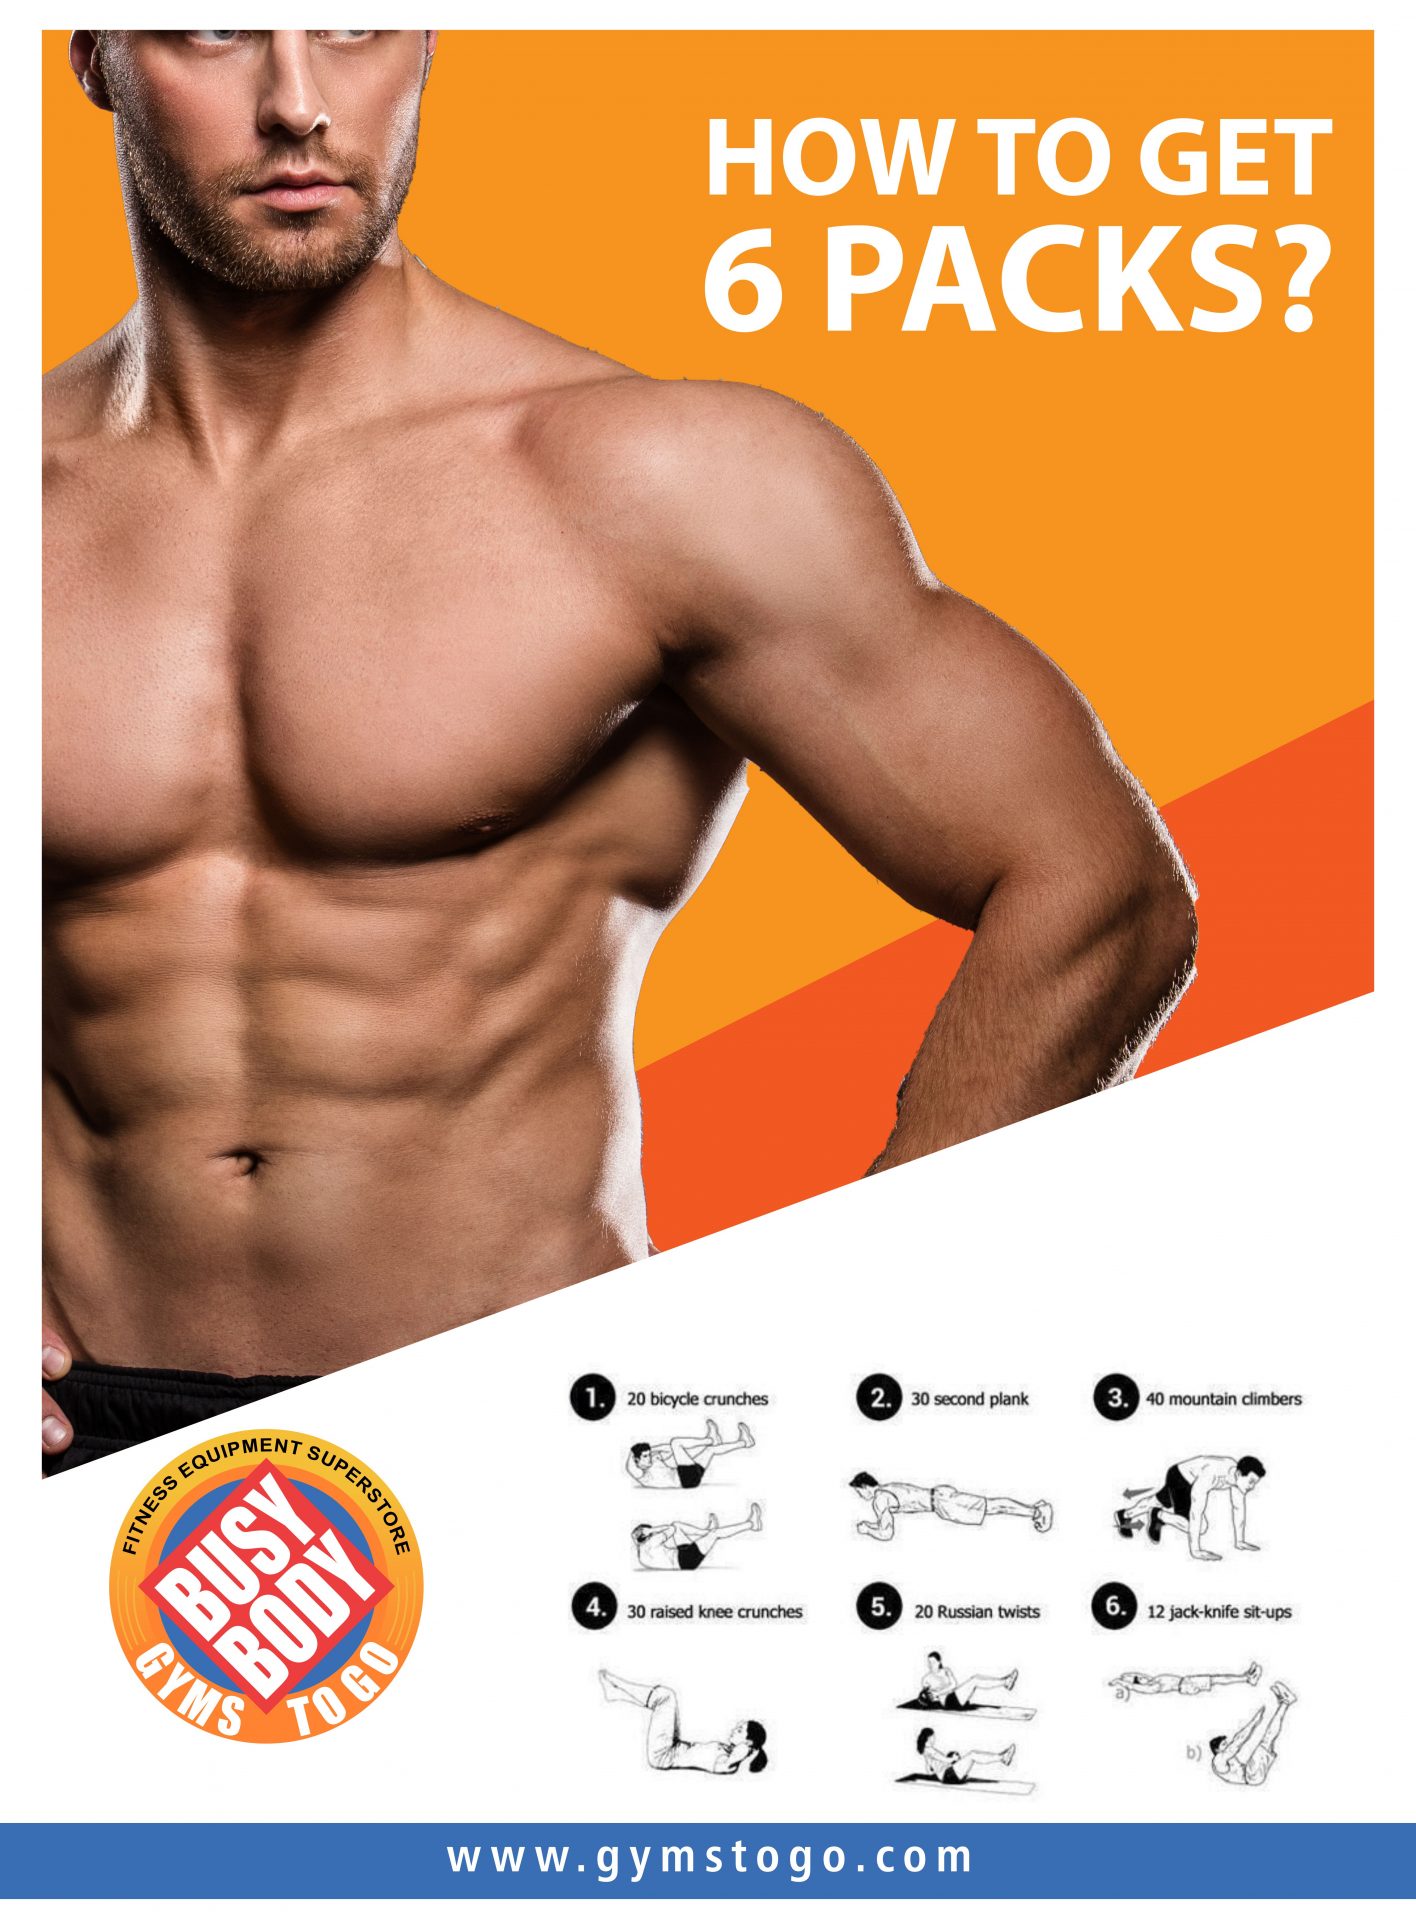 6 Steps to Achieving Six-Pack Abs at Home